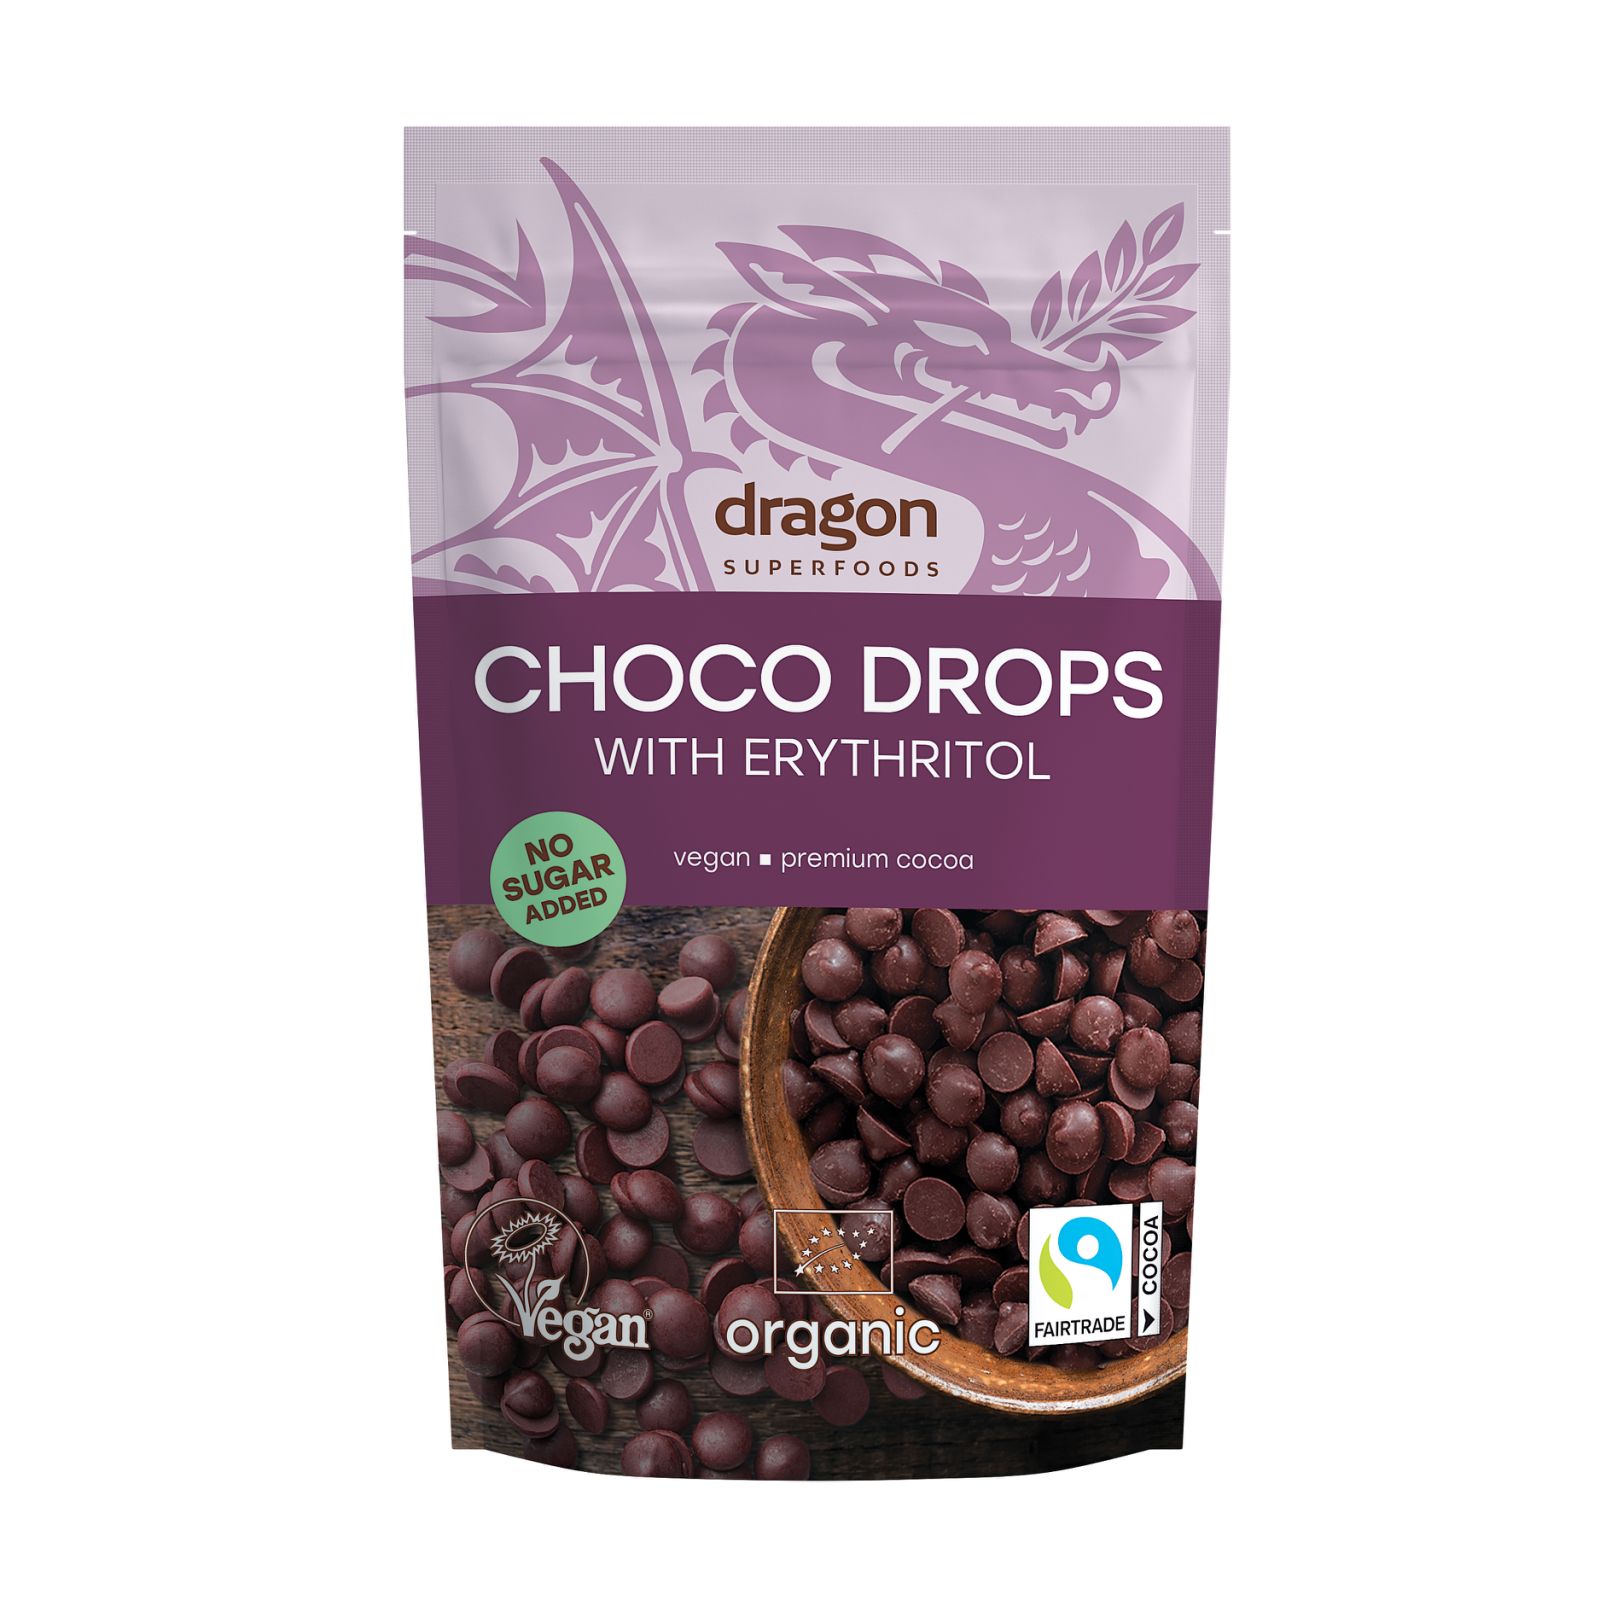 Choco drops without added sugar